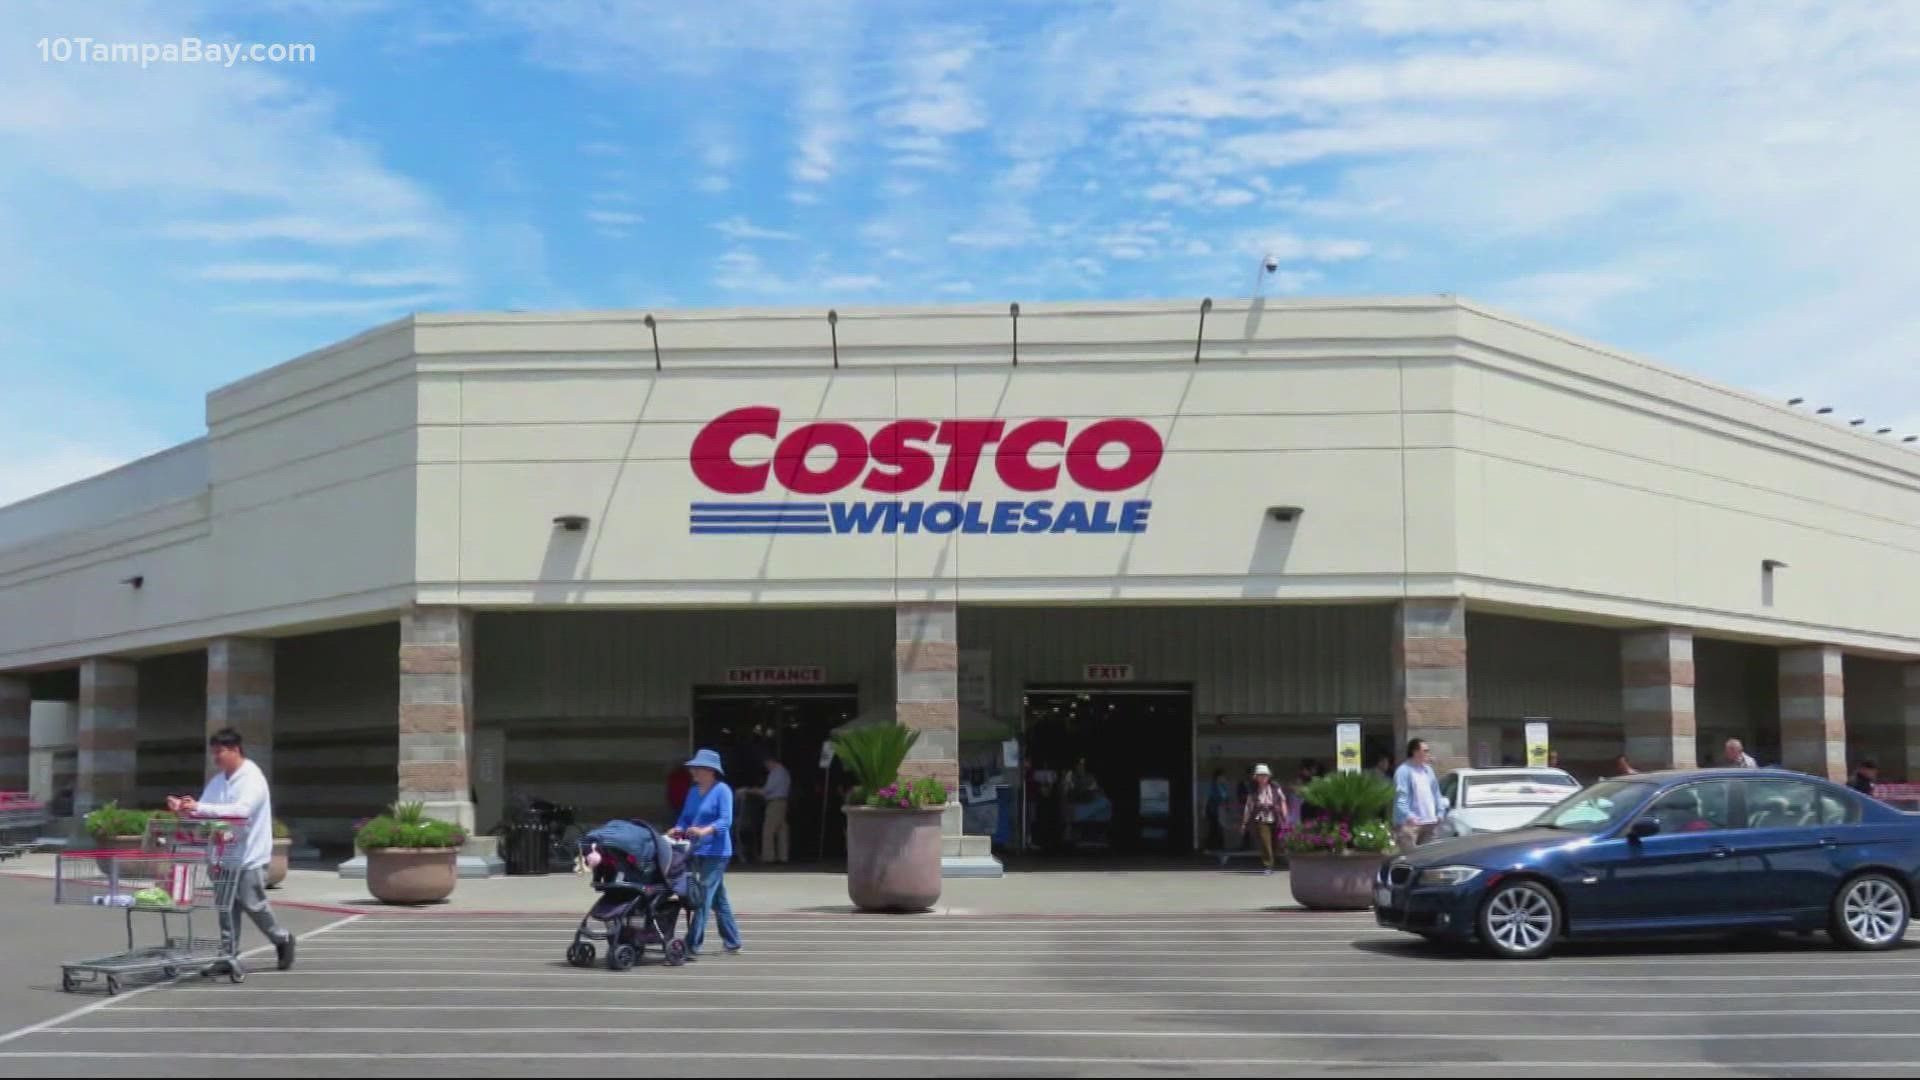 Costco was one of the first businesses to enact special shopping hours for people at higher risk from COVID-19. That's about to change.